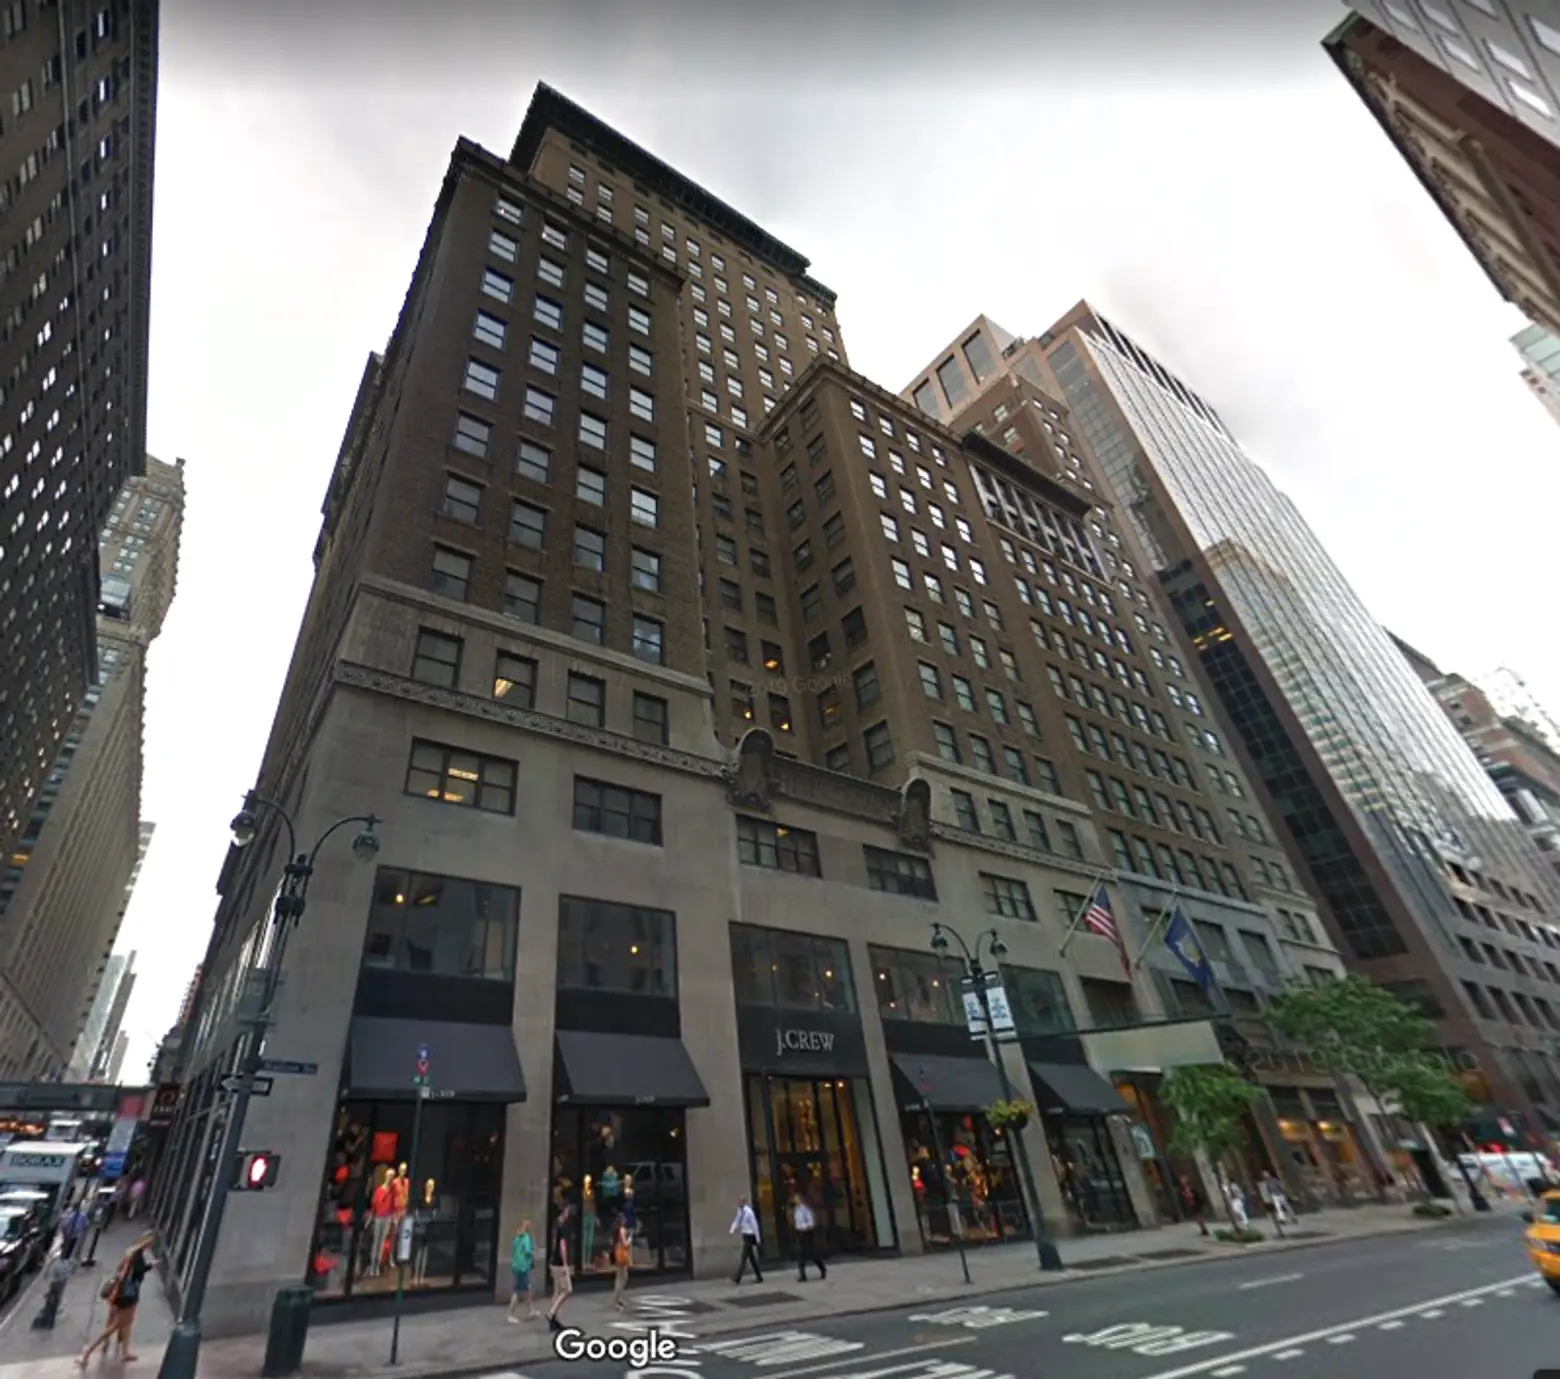 Deal reached to redevelop MTA’s former Midtown East headquarters, making way for new tower